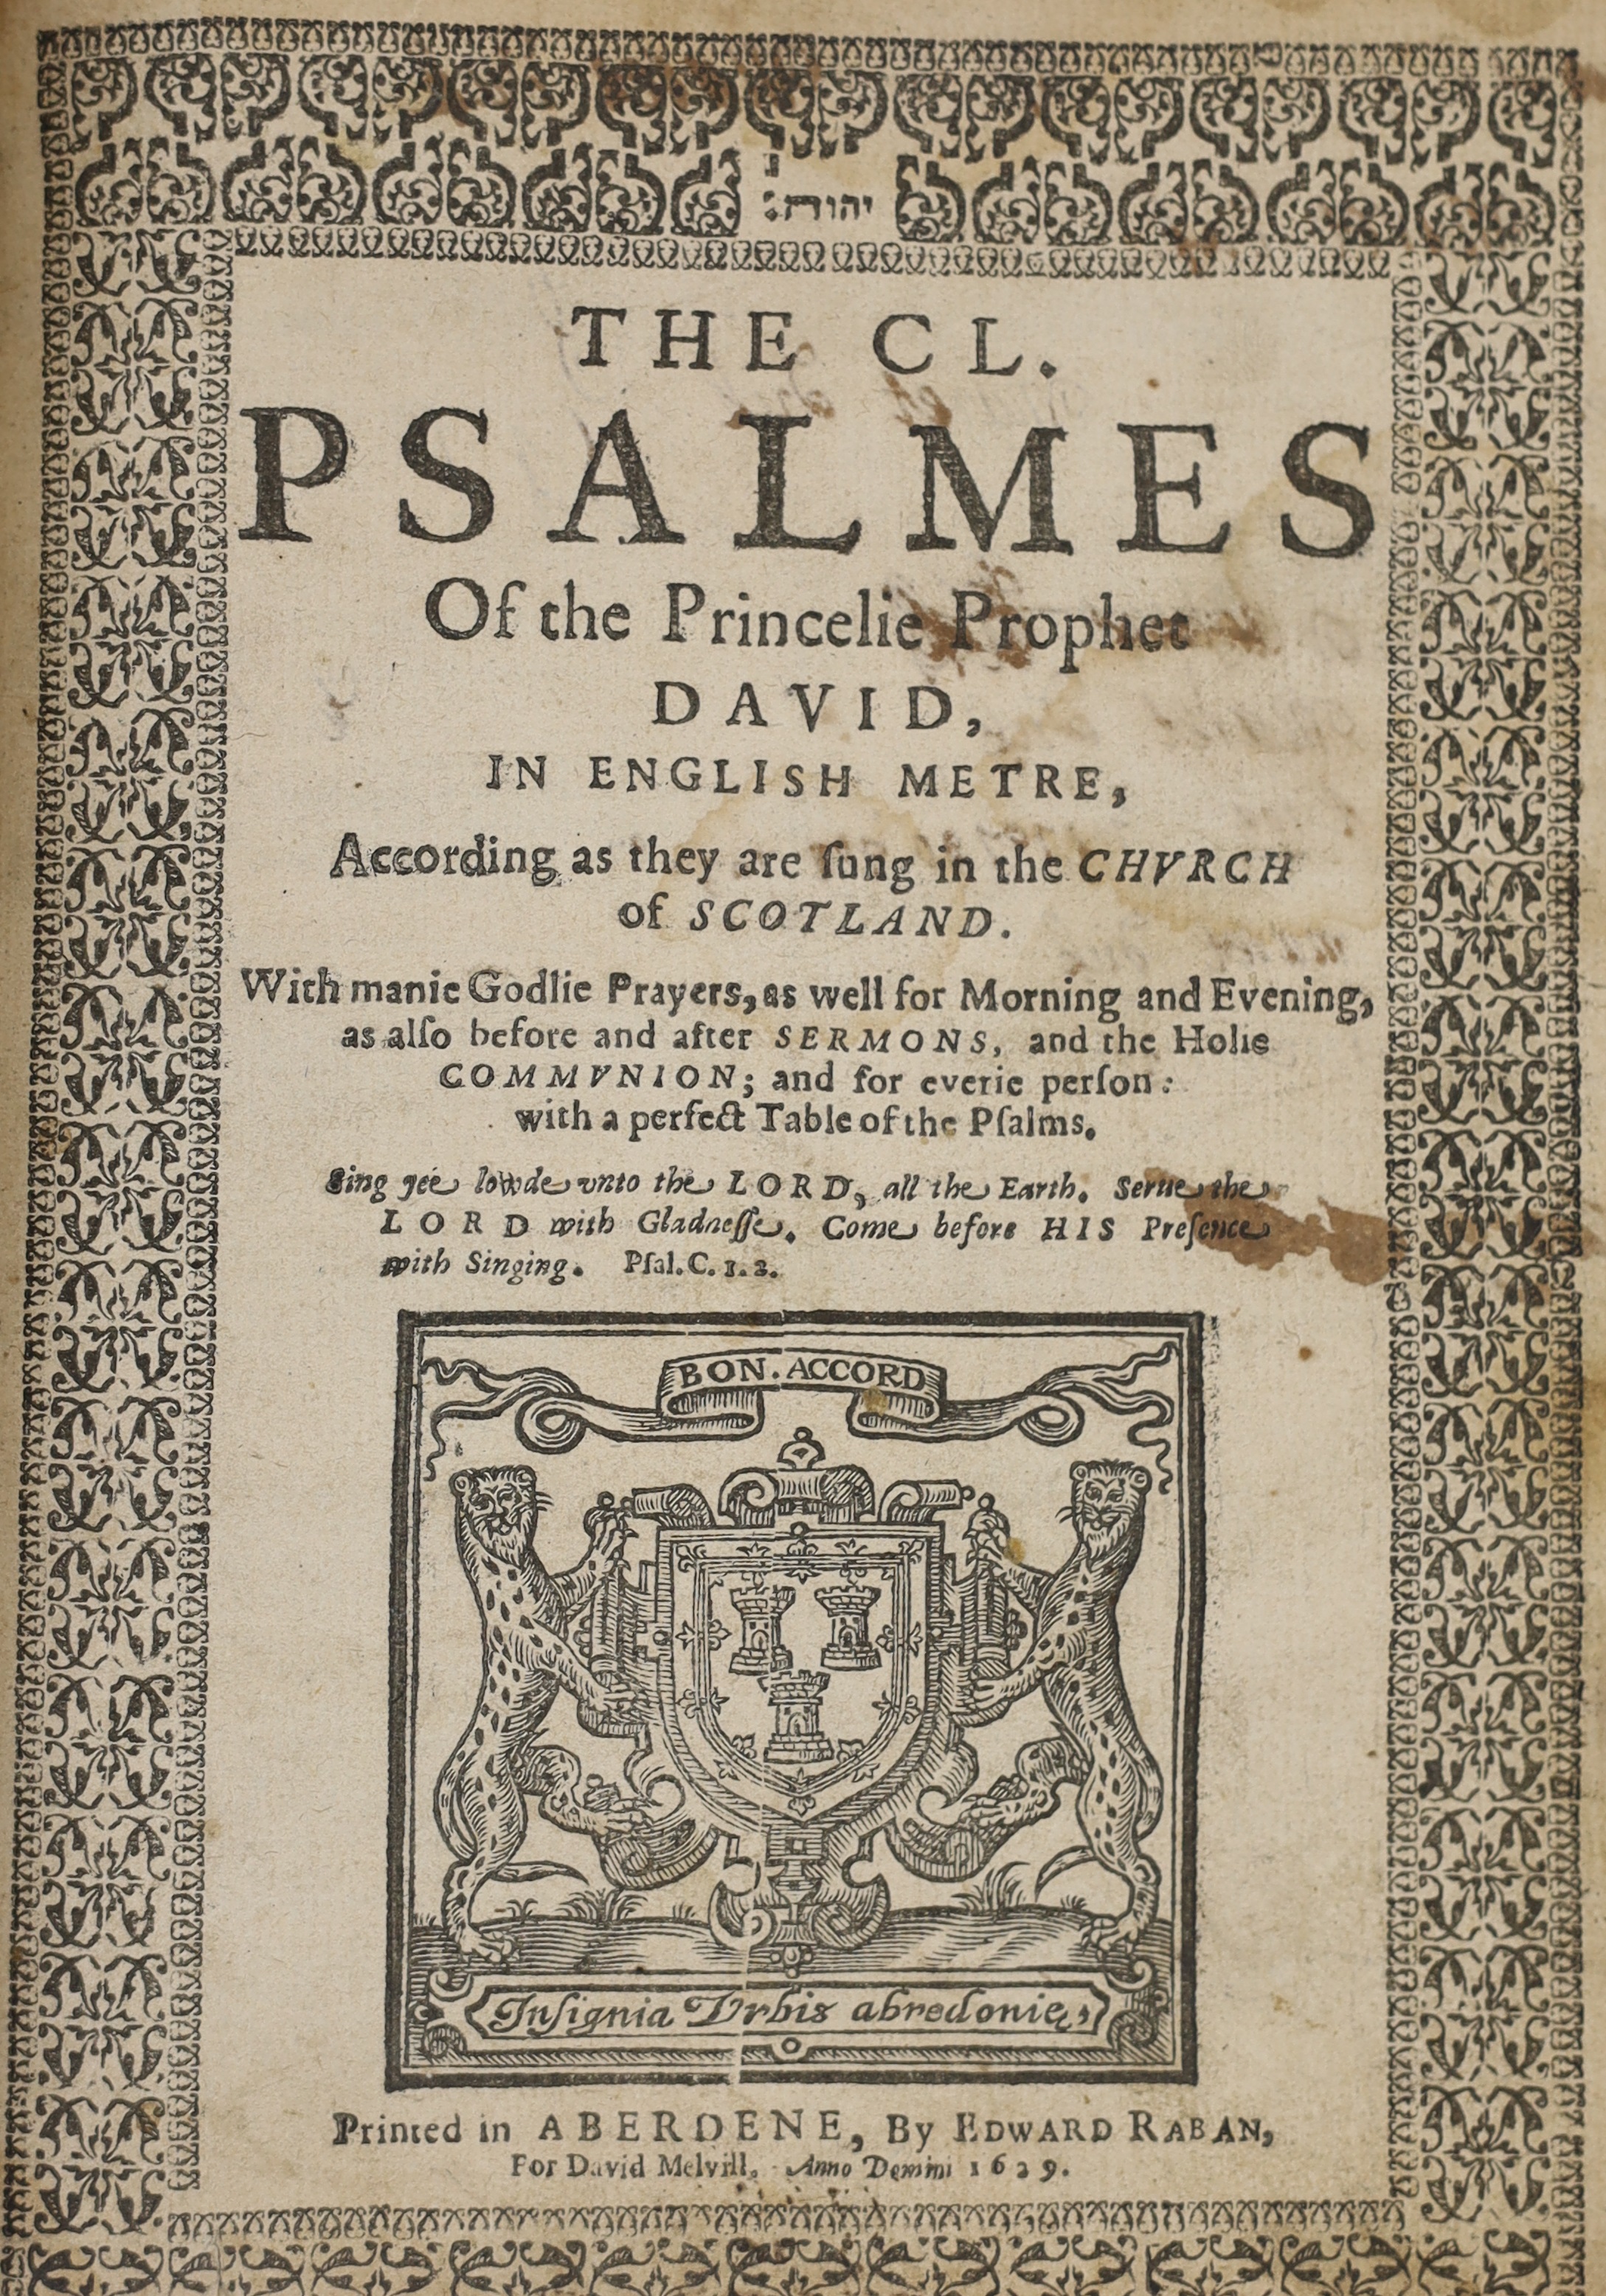 [The rare 'Aberdonian' Scottish Psalms] The CL. Psalmes of the Princelie Prophet David ... According as they are Sung in the Church of Scotland ... title with engraved arms of the City, and all within decorated borders.